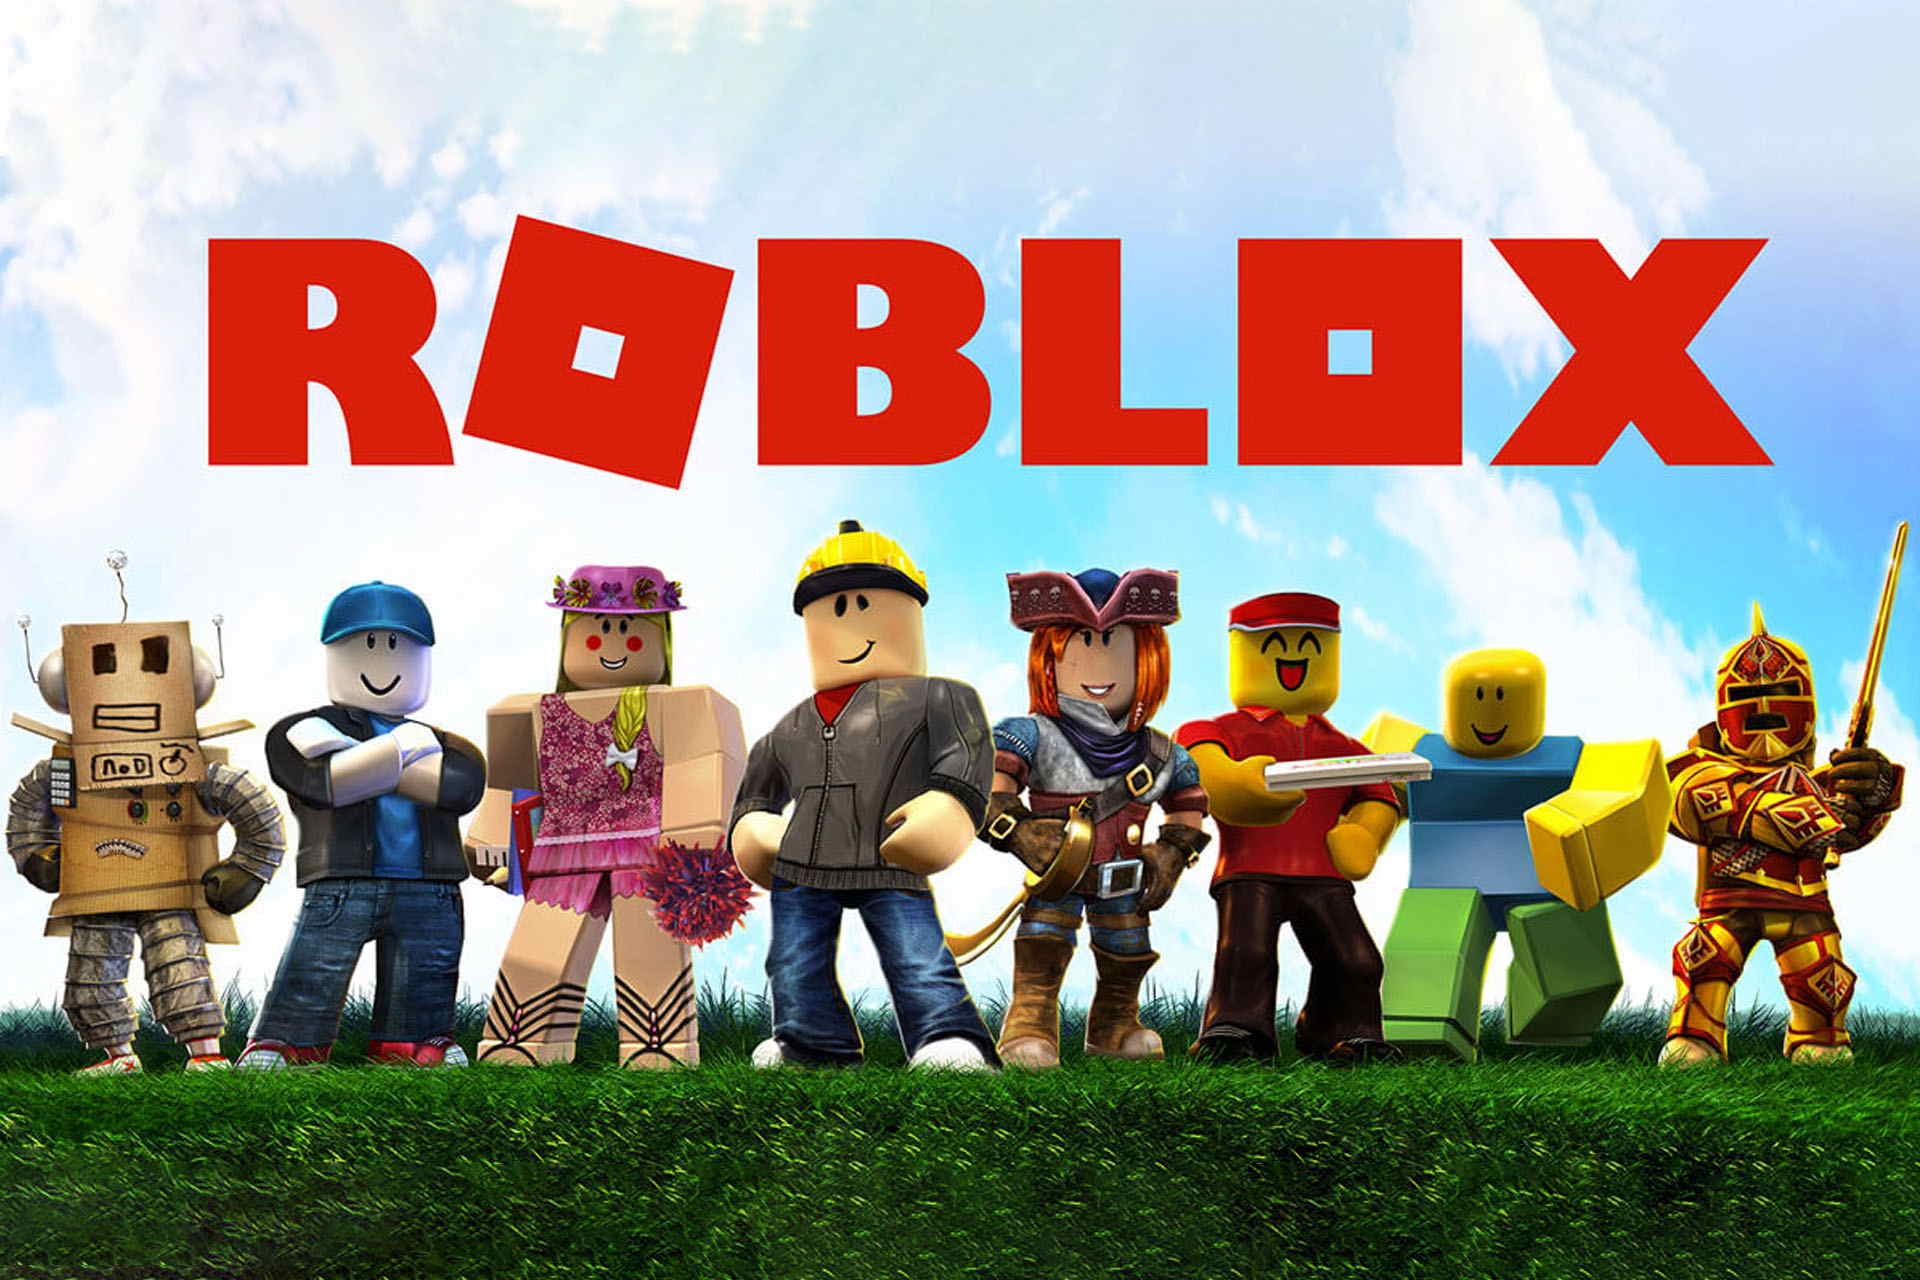 5 Alternative Games Like Roblox To Play Online - roblox games you can comment on